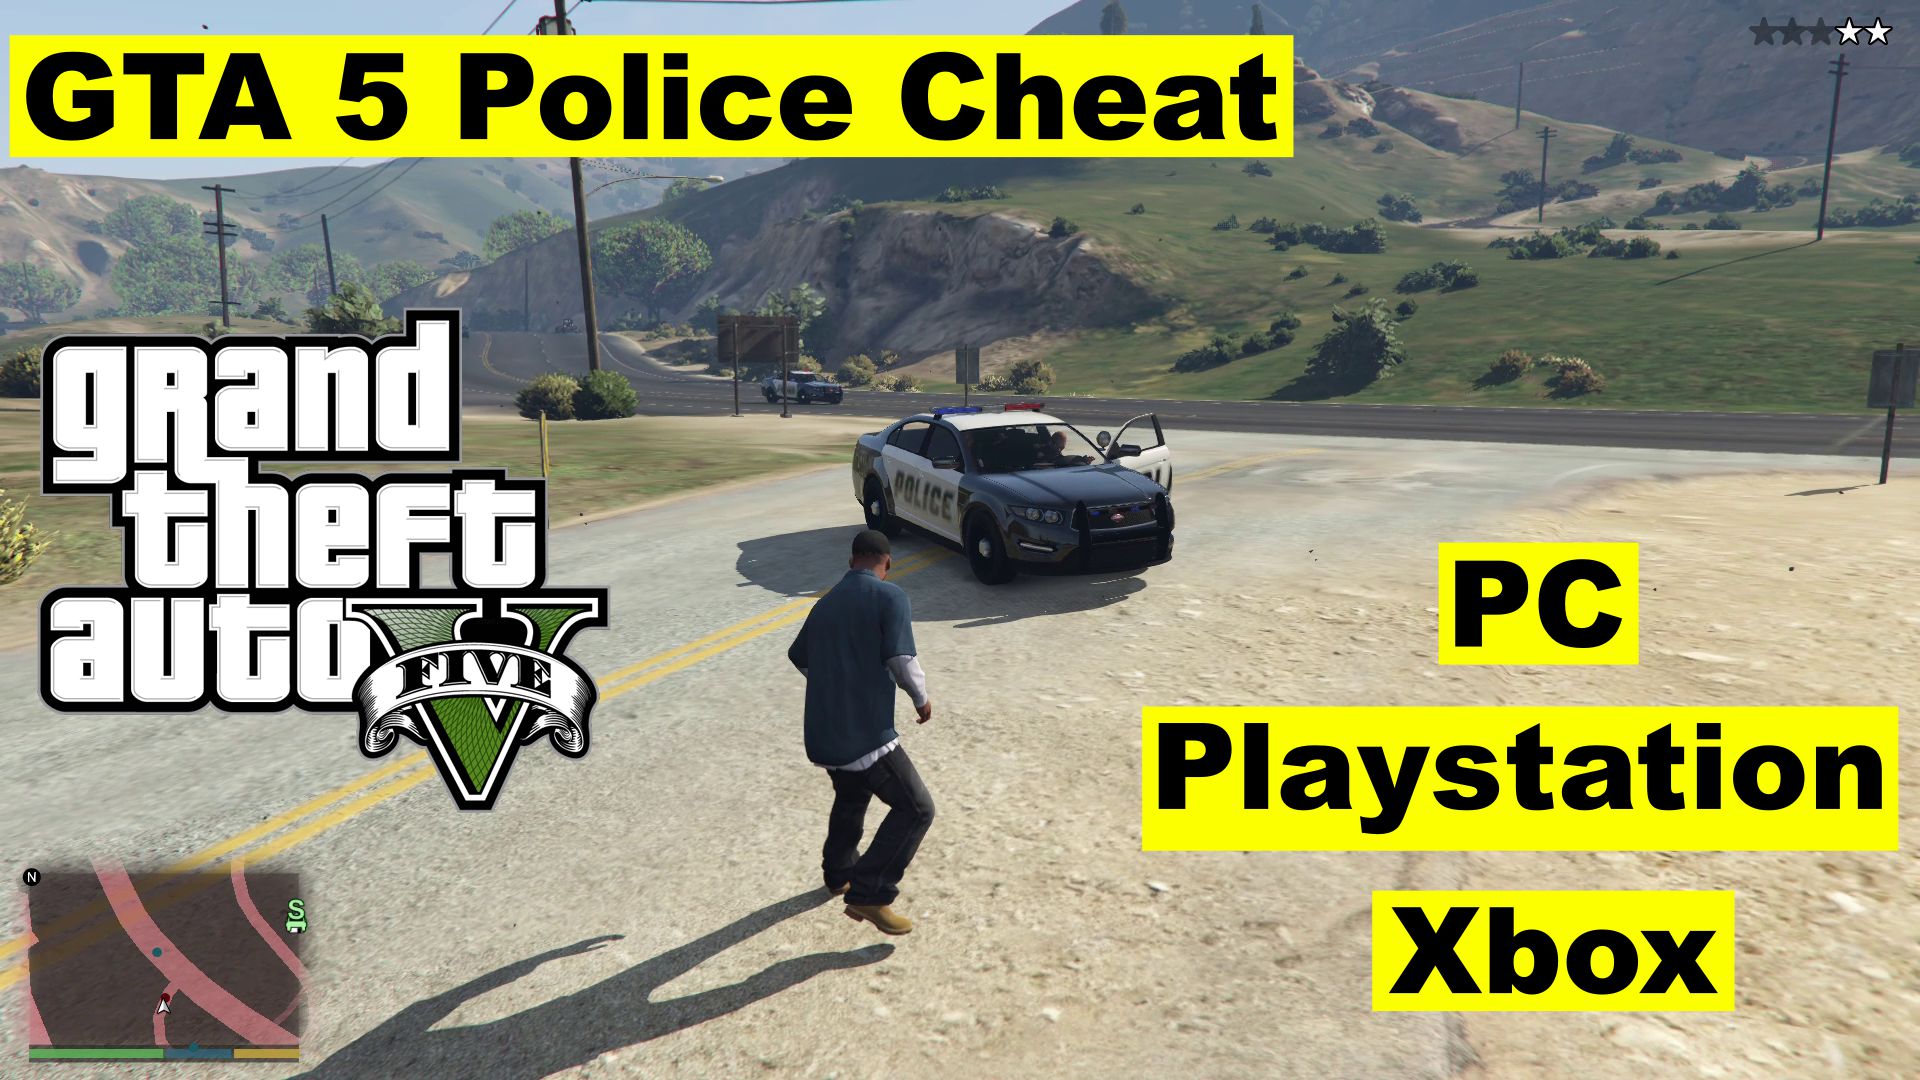 GTA 5 police cheat for PC, Xbox, Playstation